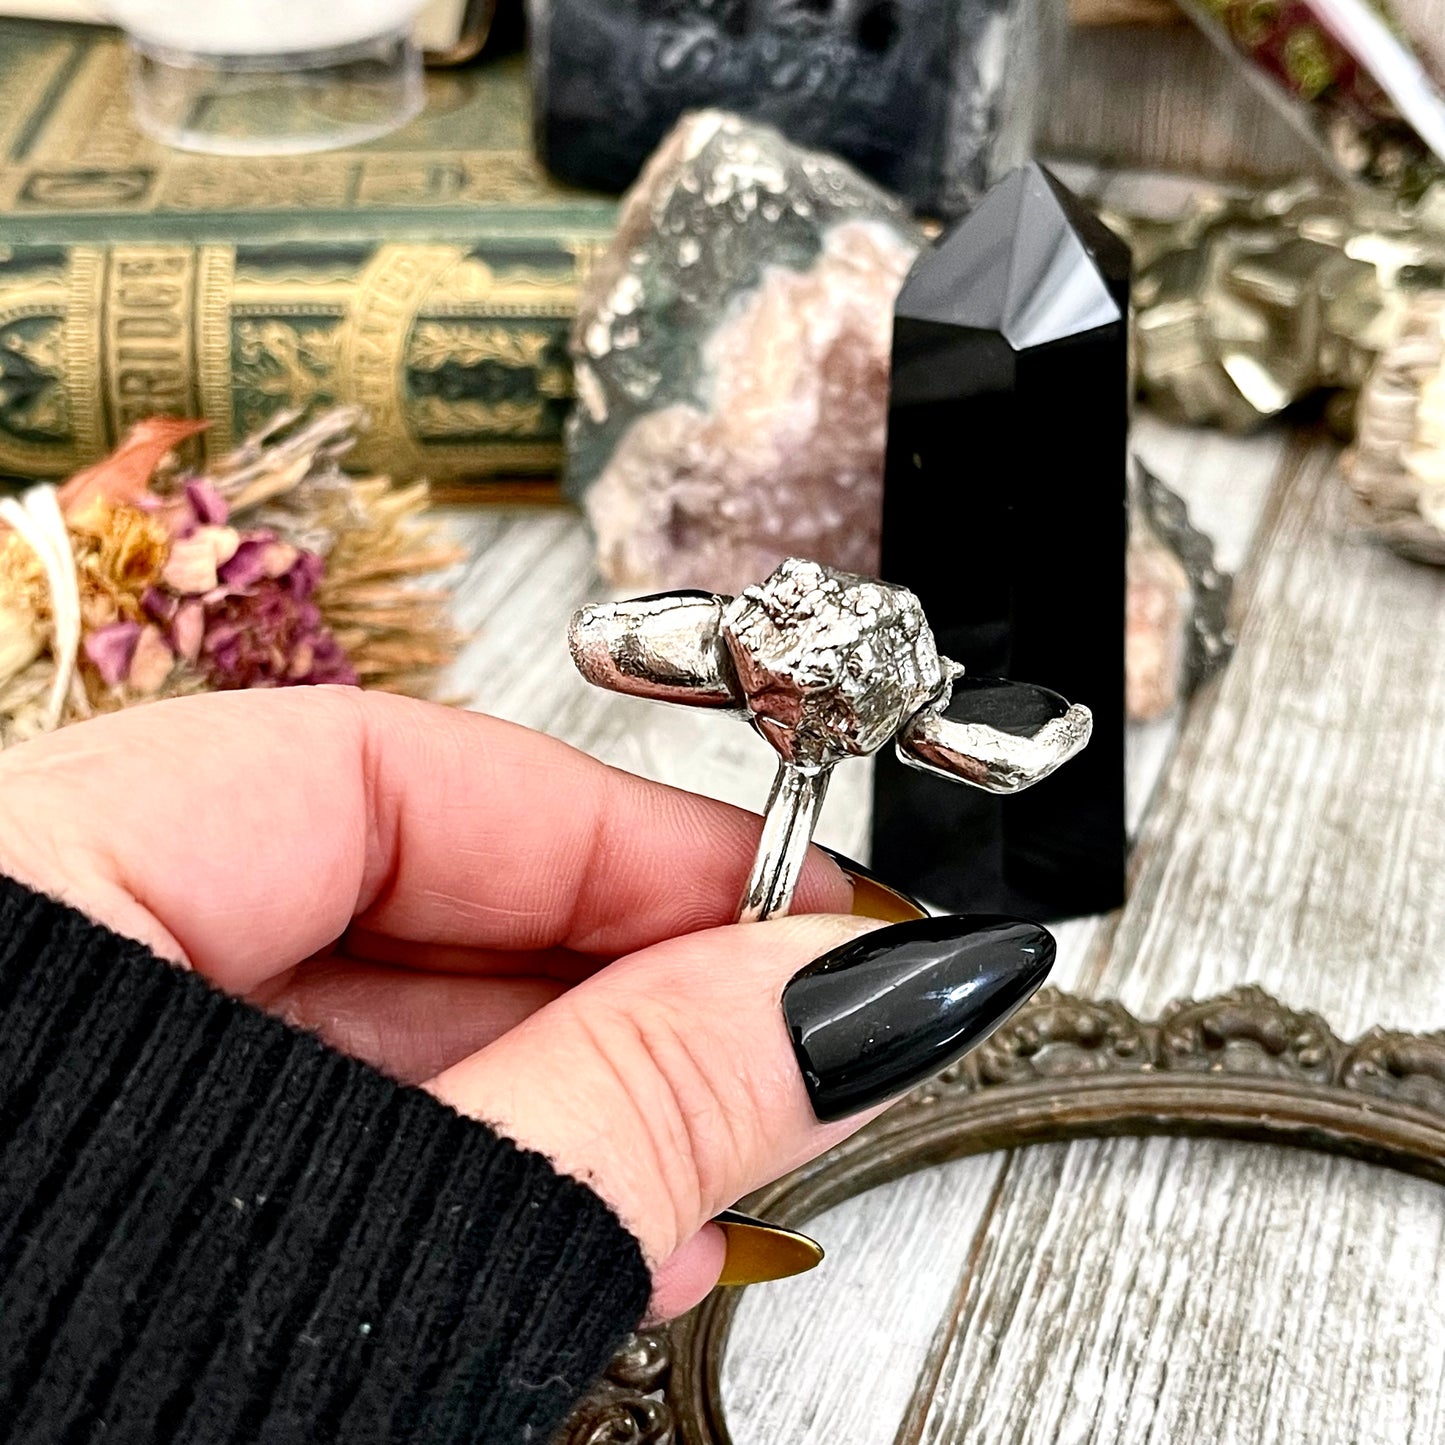 Size 7 Big Crystal Ring - Three Stone Black Onyx Smokey Quartz Silver Ring / Foxlark Collection - One of a Kind Jewelry